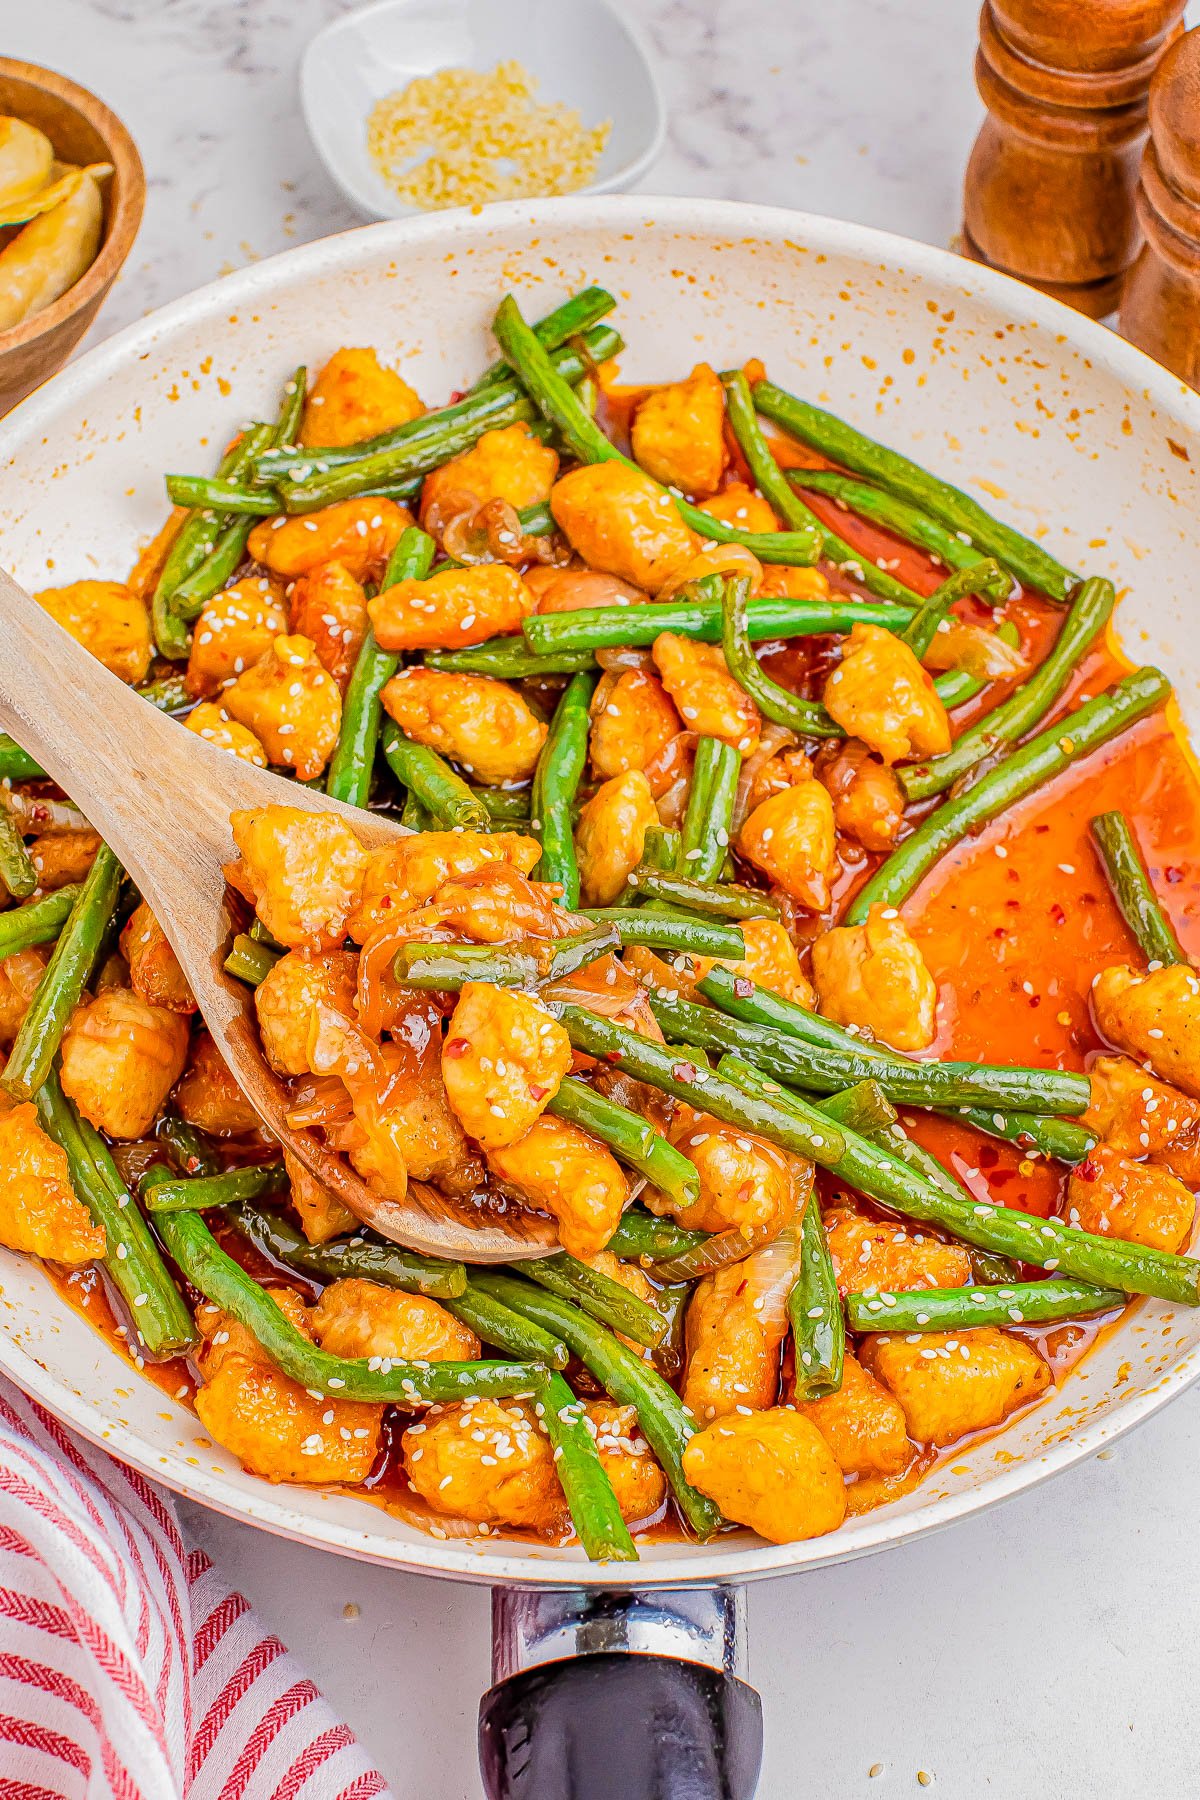 A skillet filled with stir-fried green beans and chunks of chicken in a glossy orange sauce, with a wooden spoon.